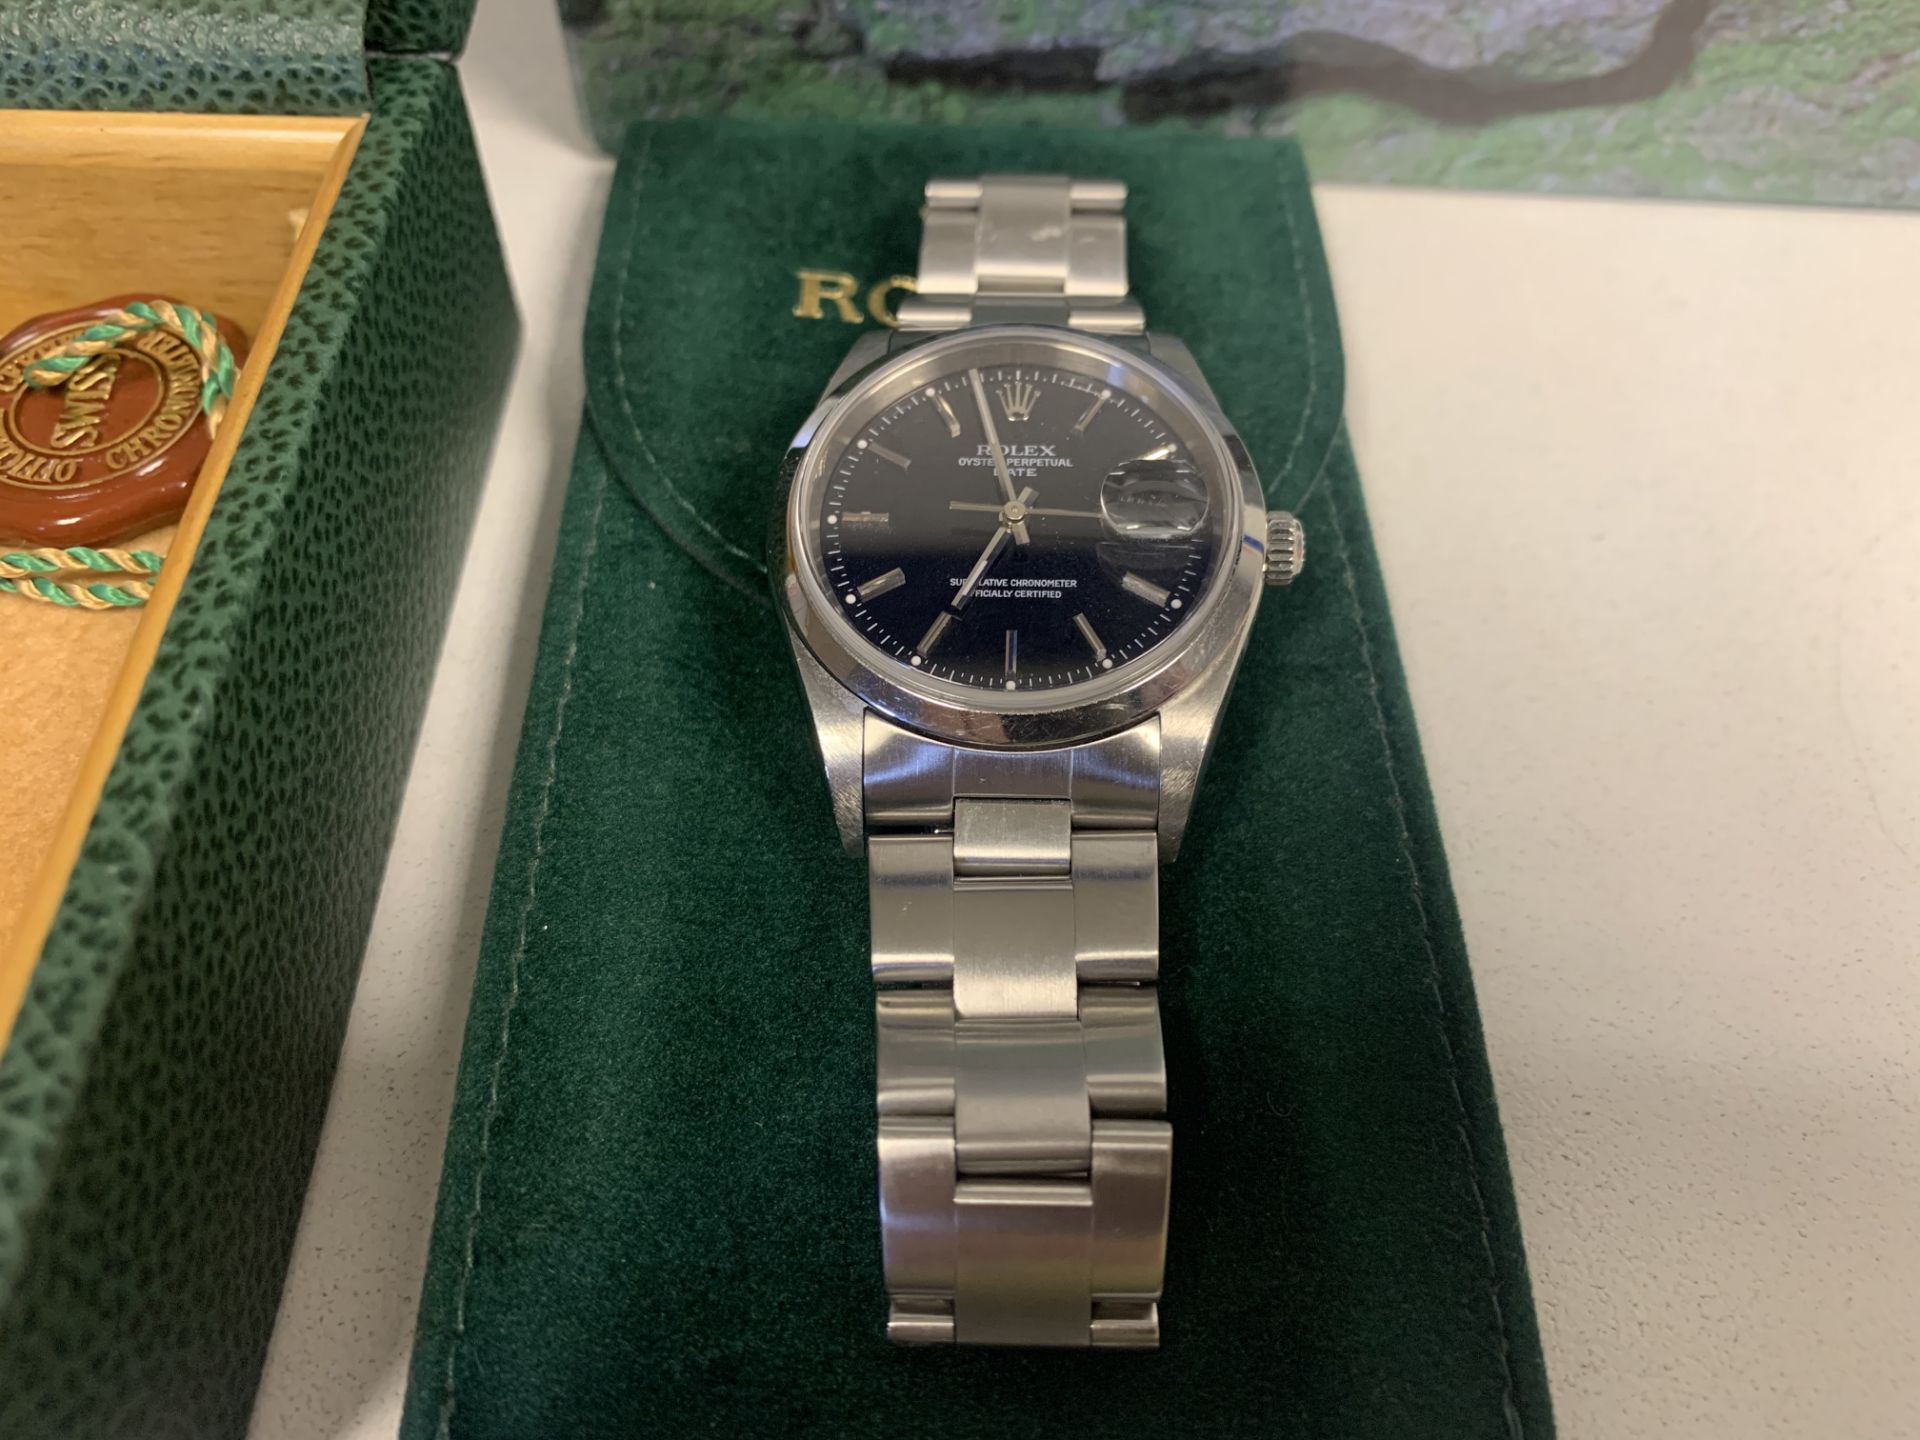 GENTS ROLEX OYSTER PERPETUAL DATE STAINLESS STEEL WRIST WATCH WITH BOX AND PAPERS - Image 2 of 12